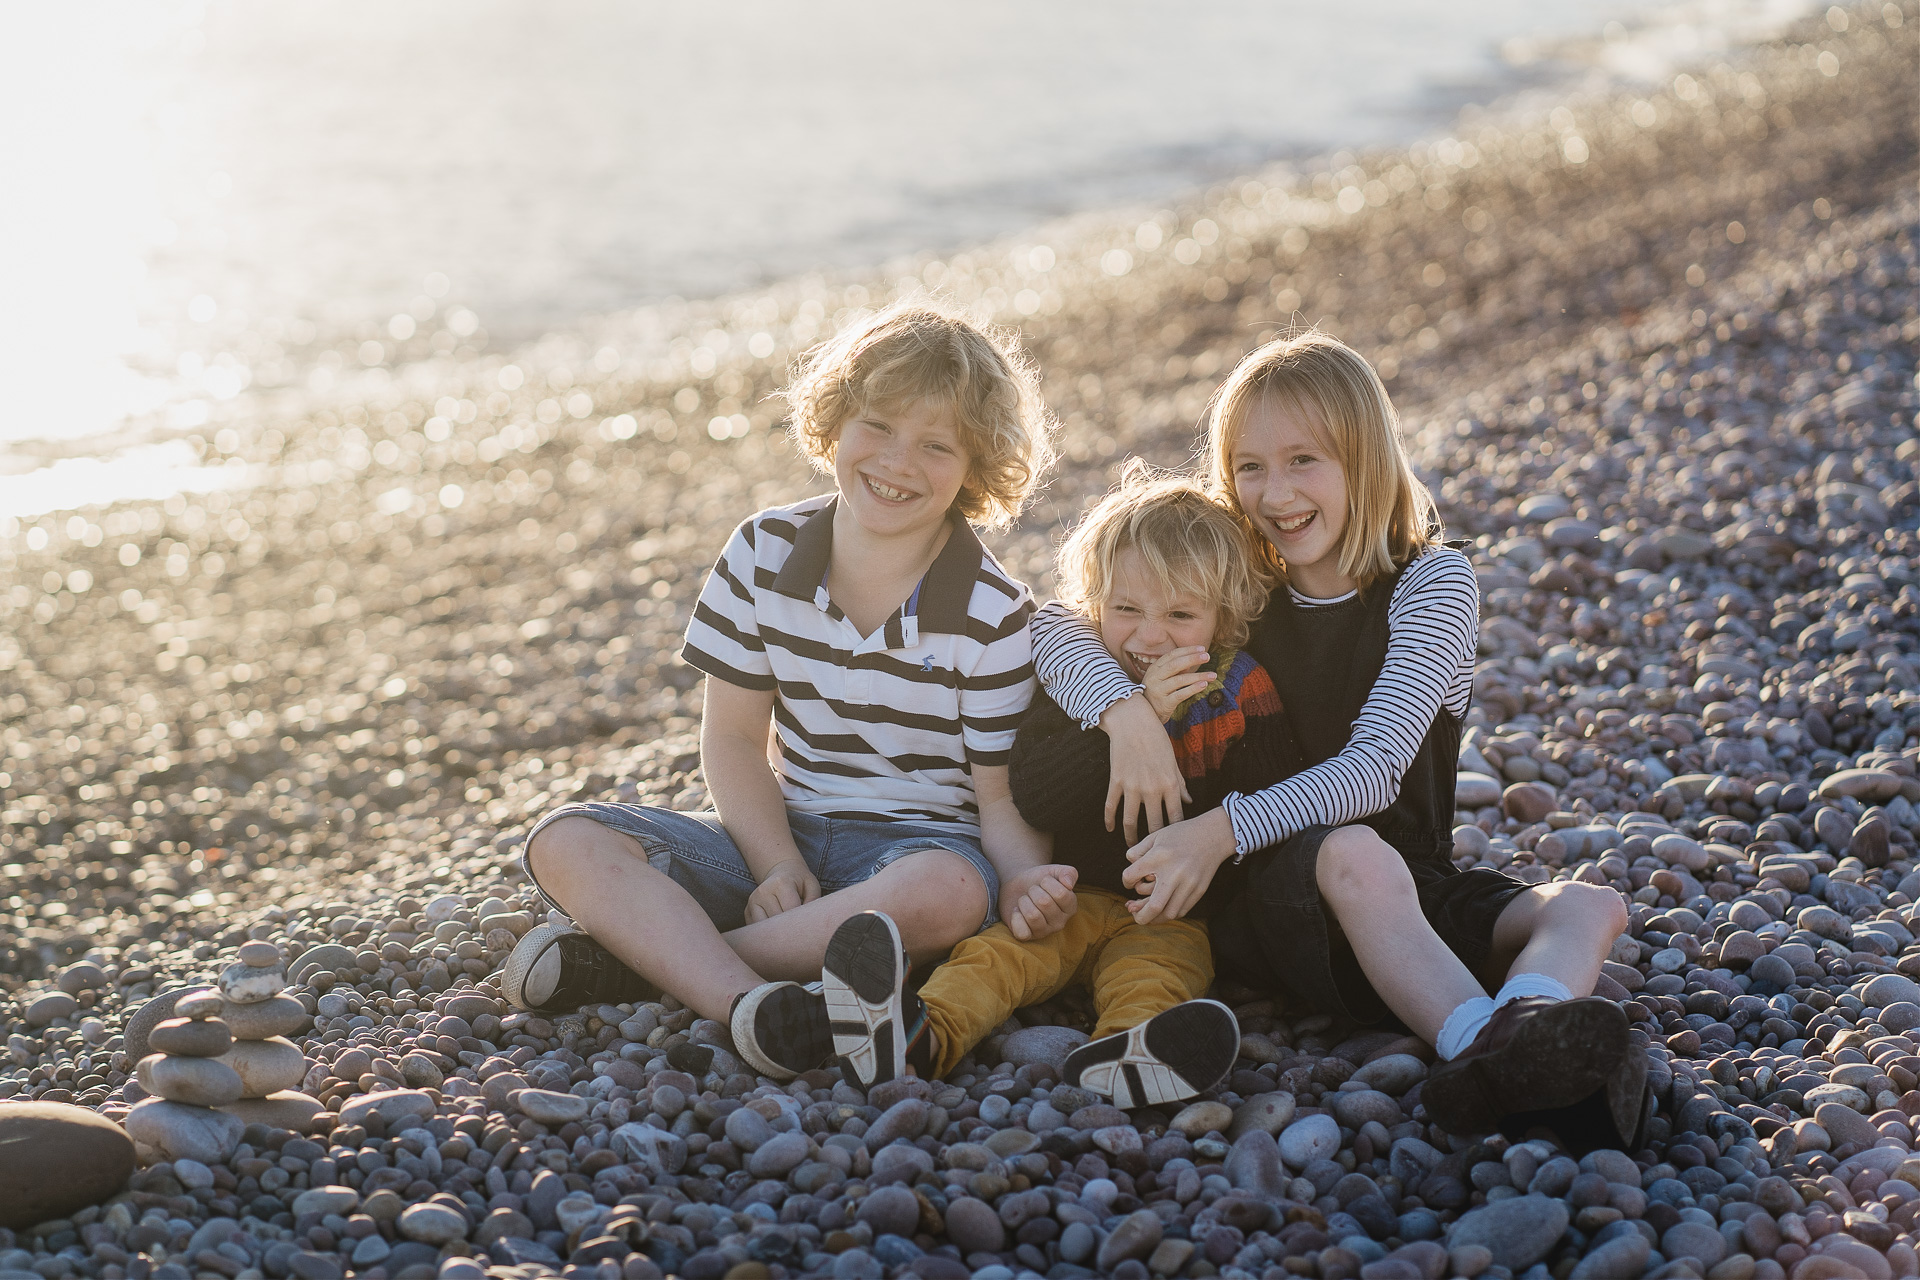 Sibling group photograph on a beach in the sunset